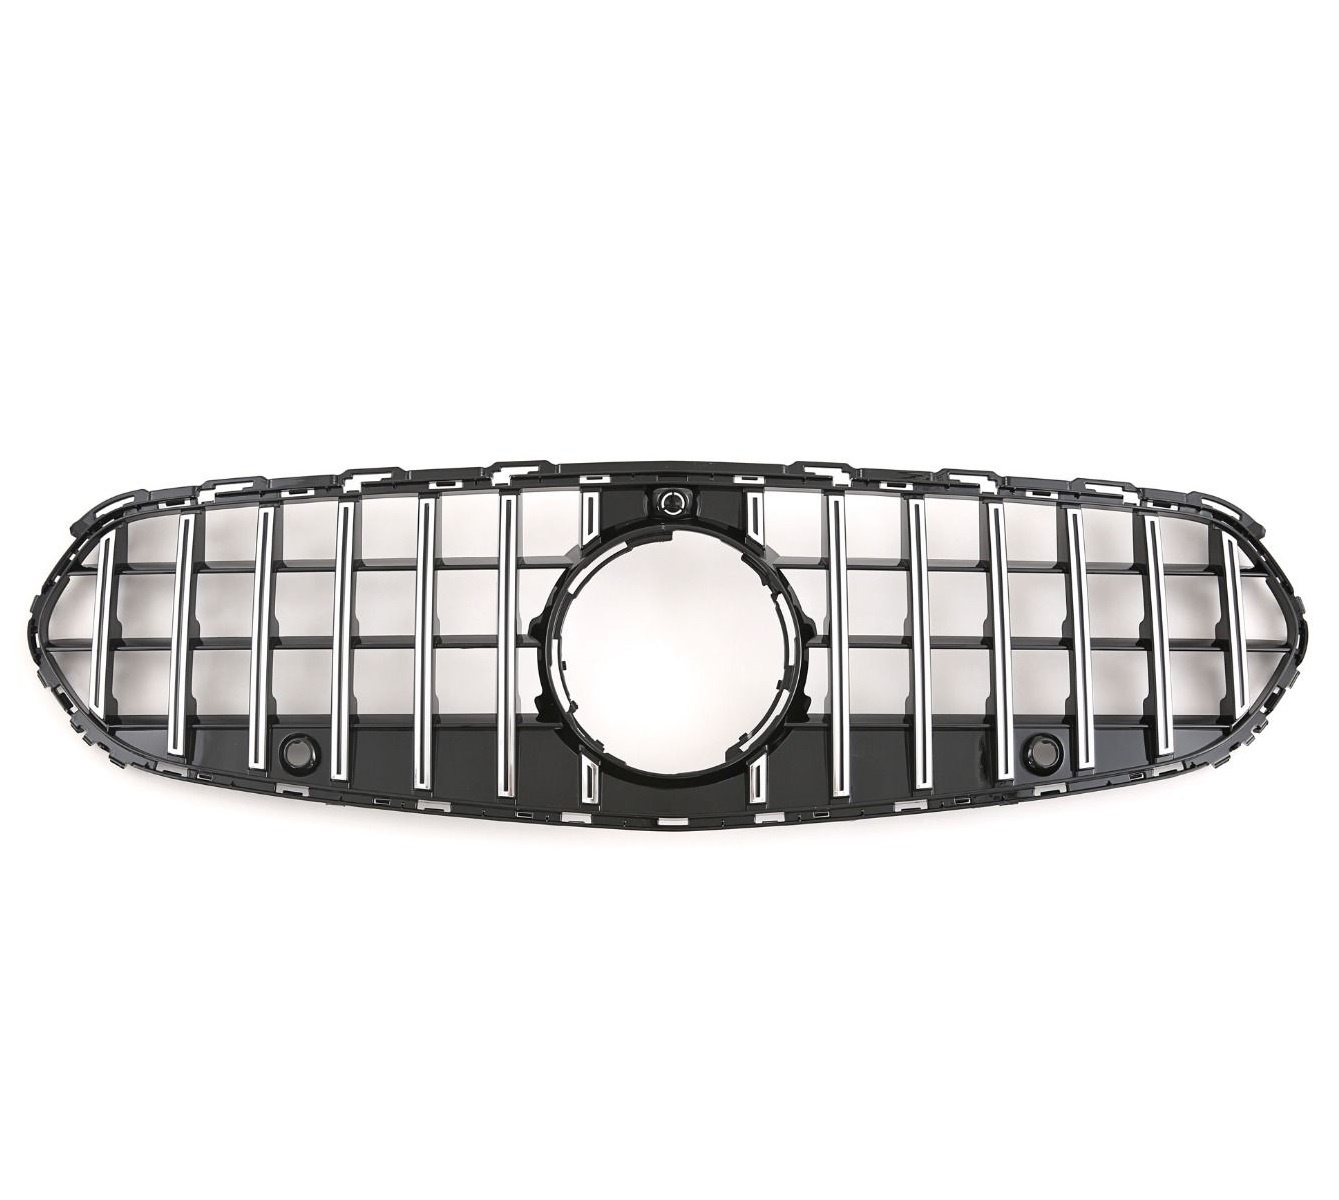 GT-R Panamericana Look Front Grill for Mercedes Benz C-Class W206 